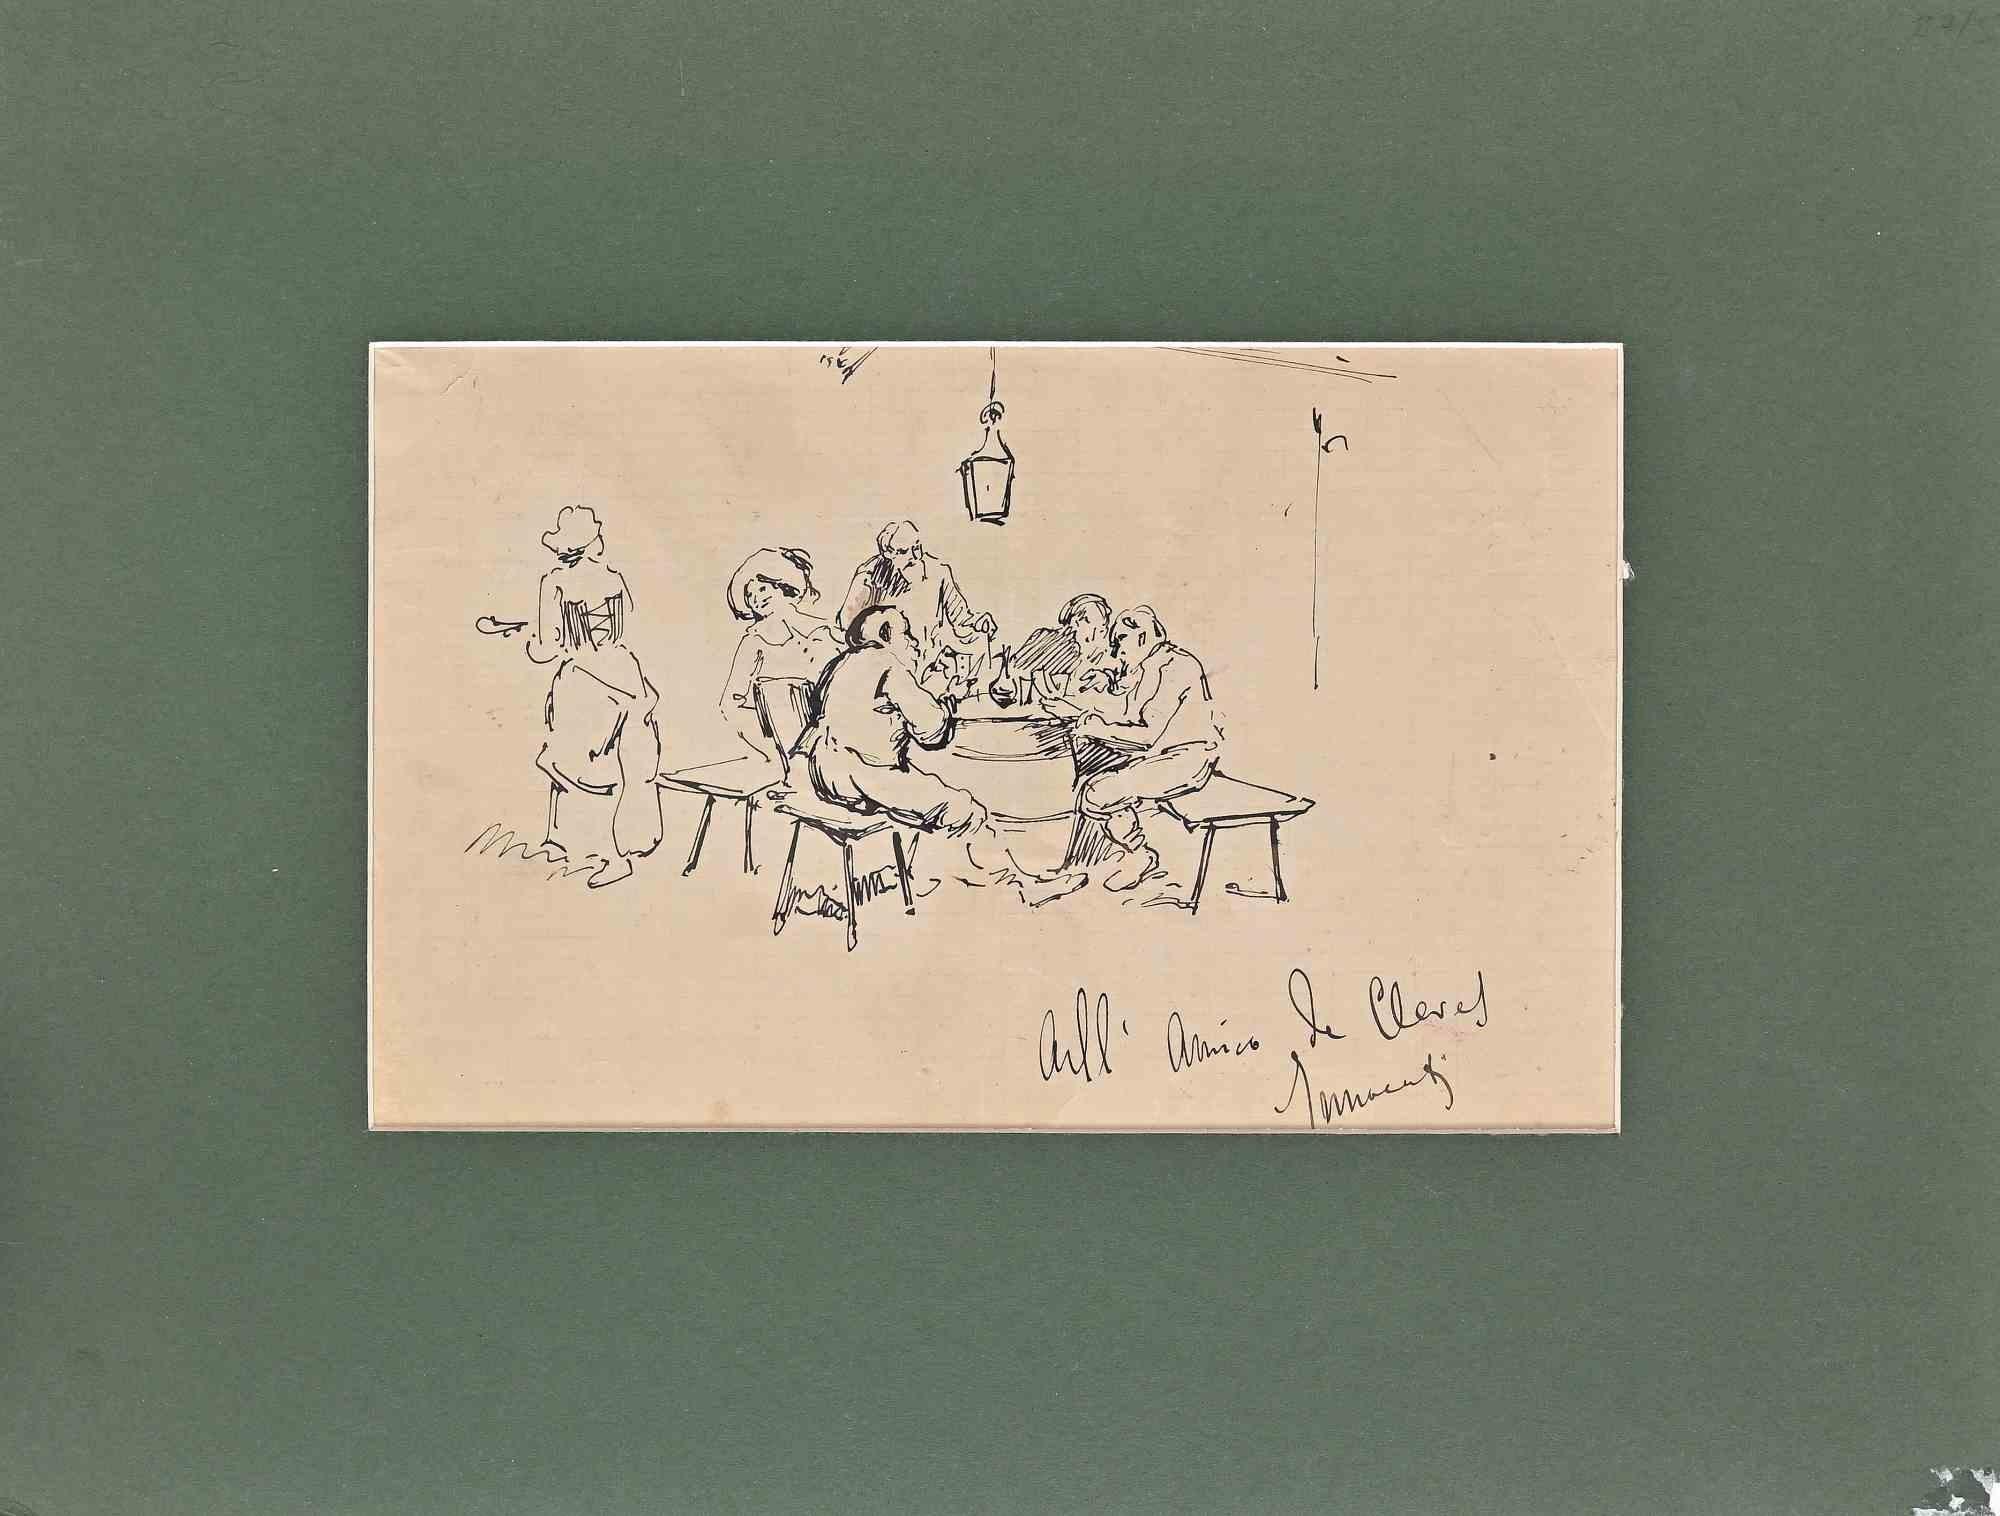 Tavern scene is an original black and white Drawing, ink on yellowed paper, realized by Camillo Innocenti.  Hand Signed and dedicated on the lower right. Included a Passpartout: cm 30x39.5.

Good conditions except for a small tear on the lower